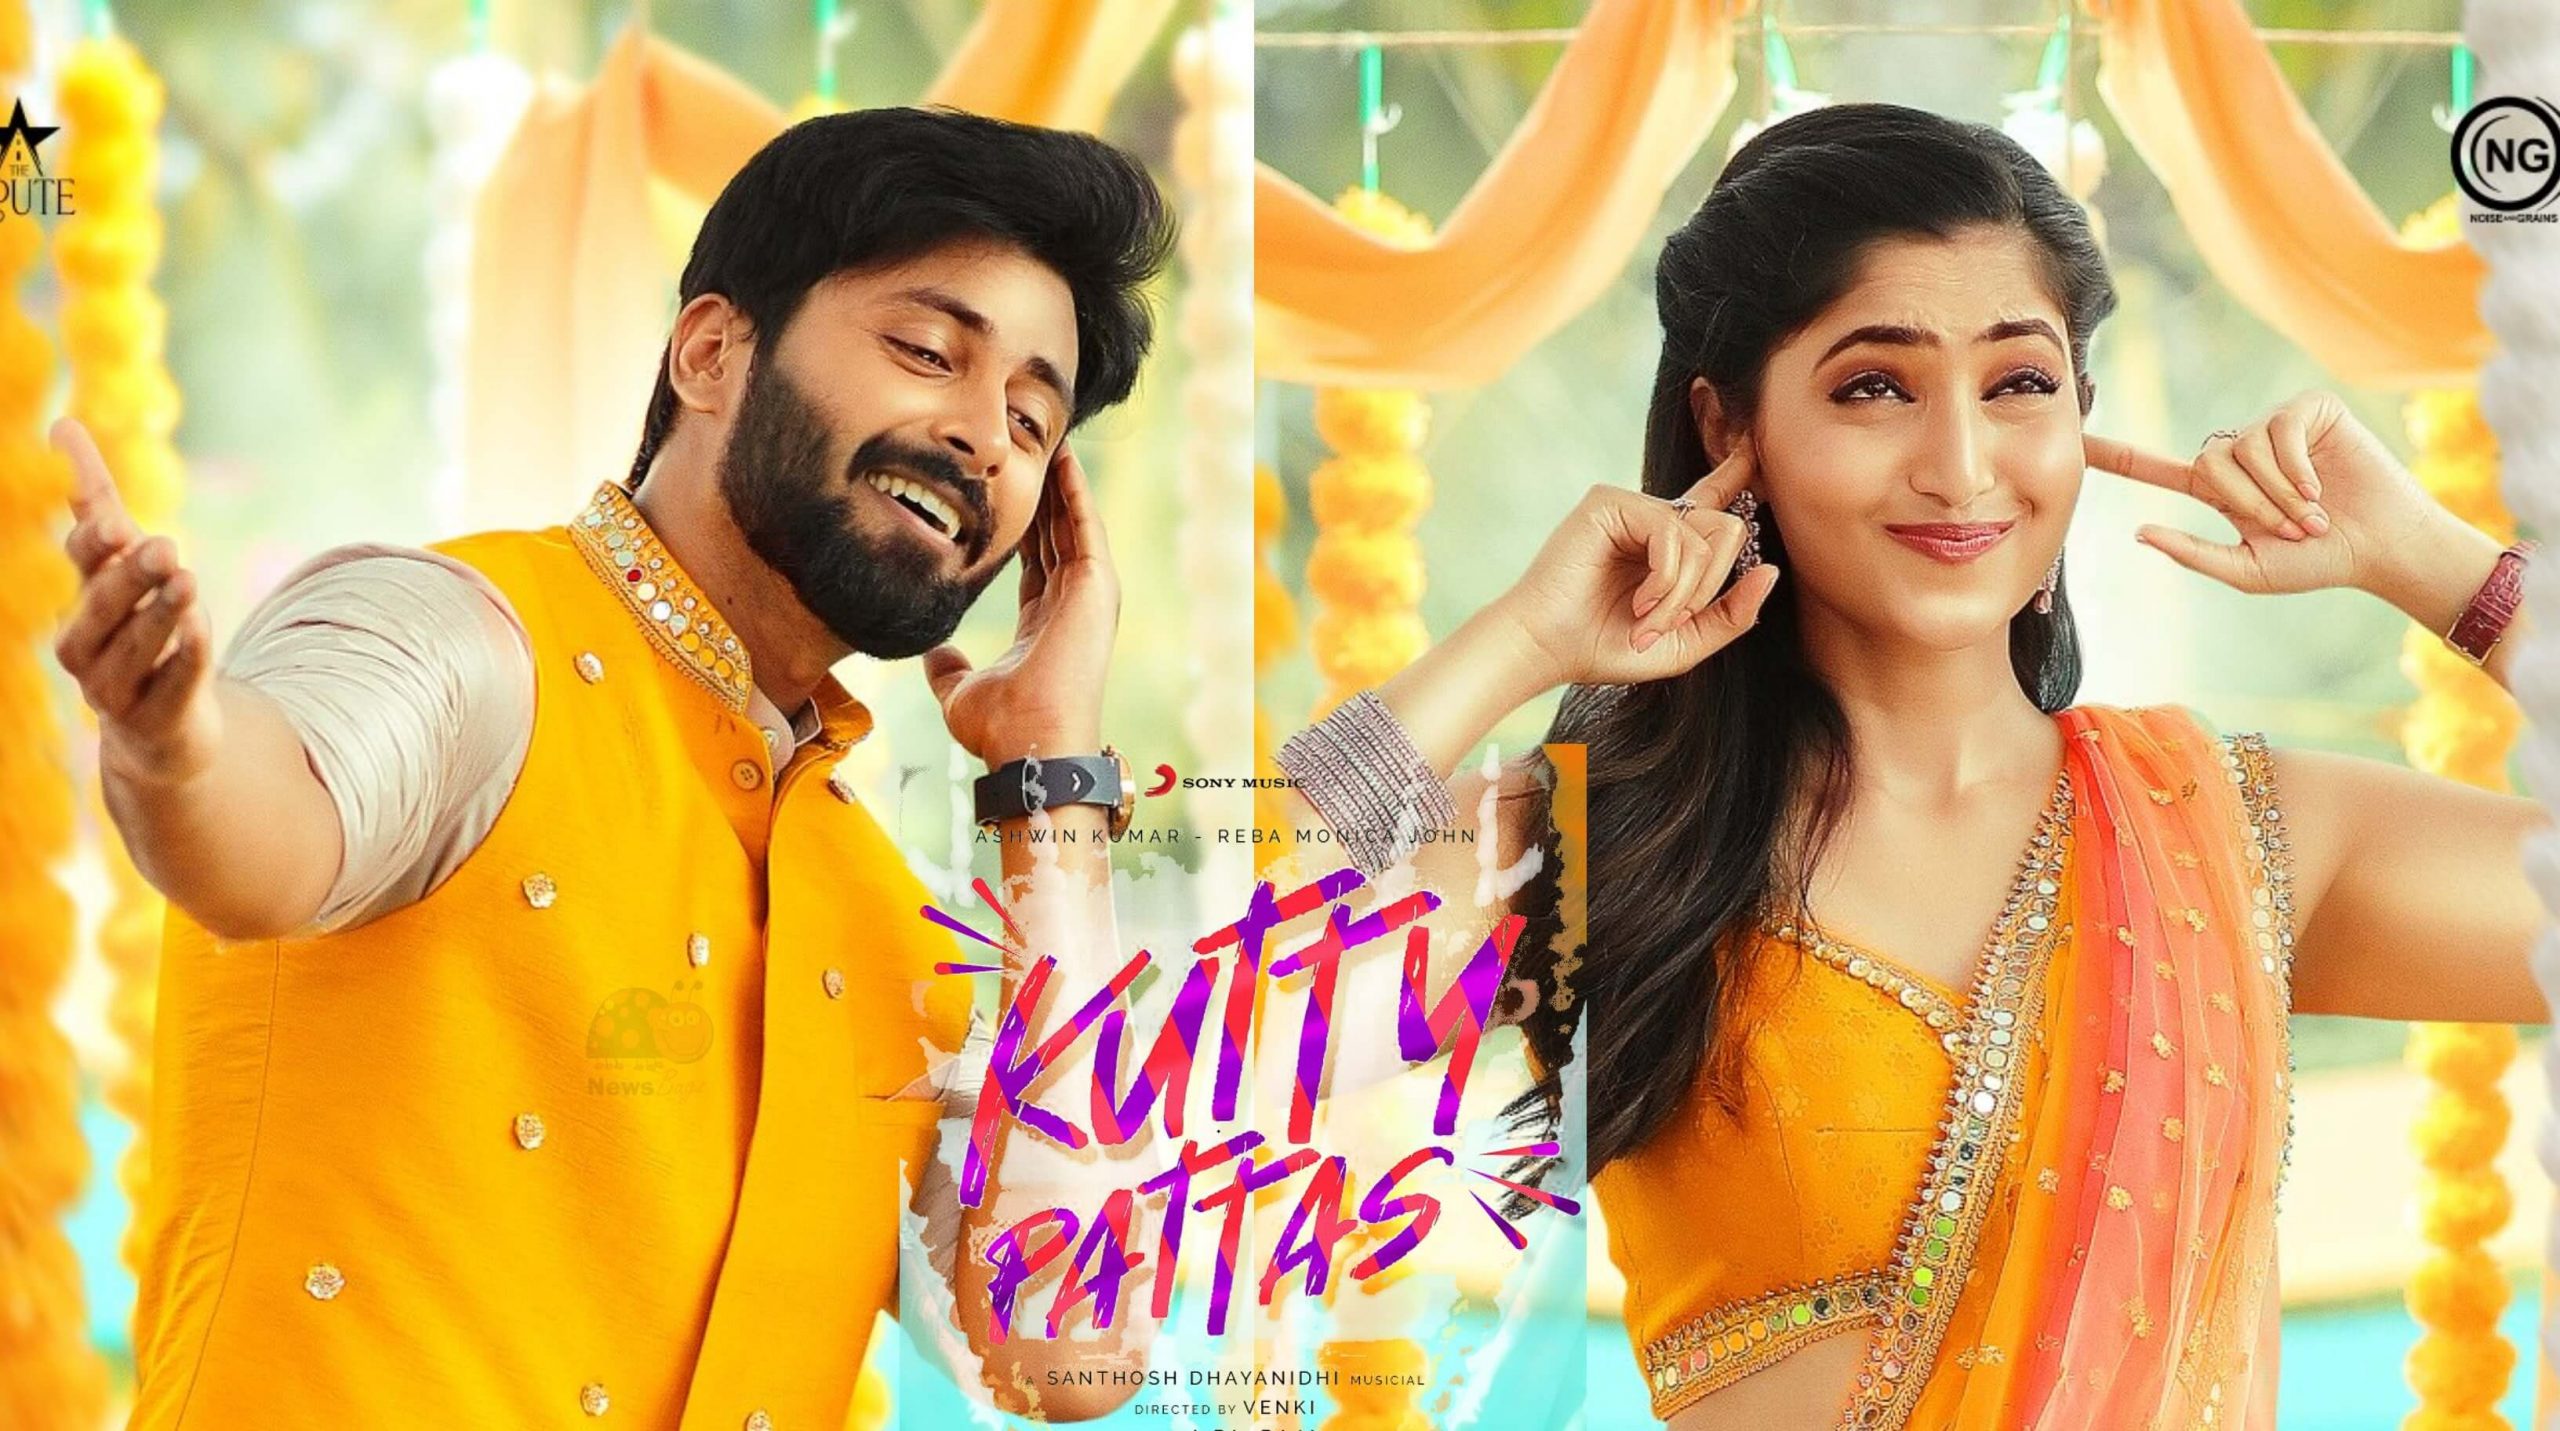 kutty pattas song download